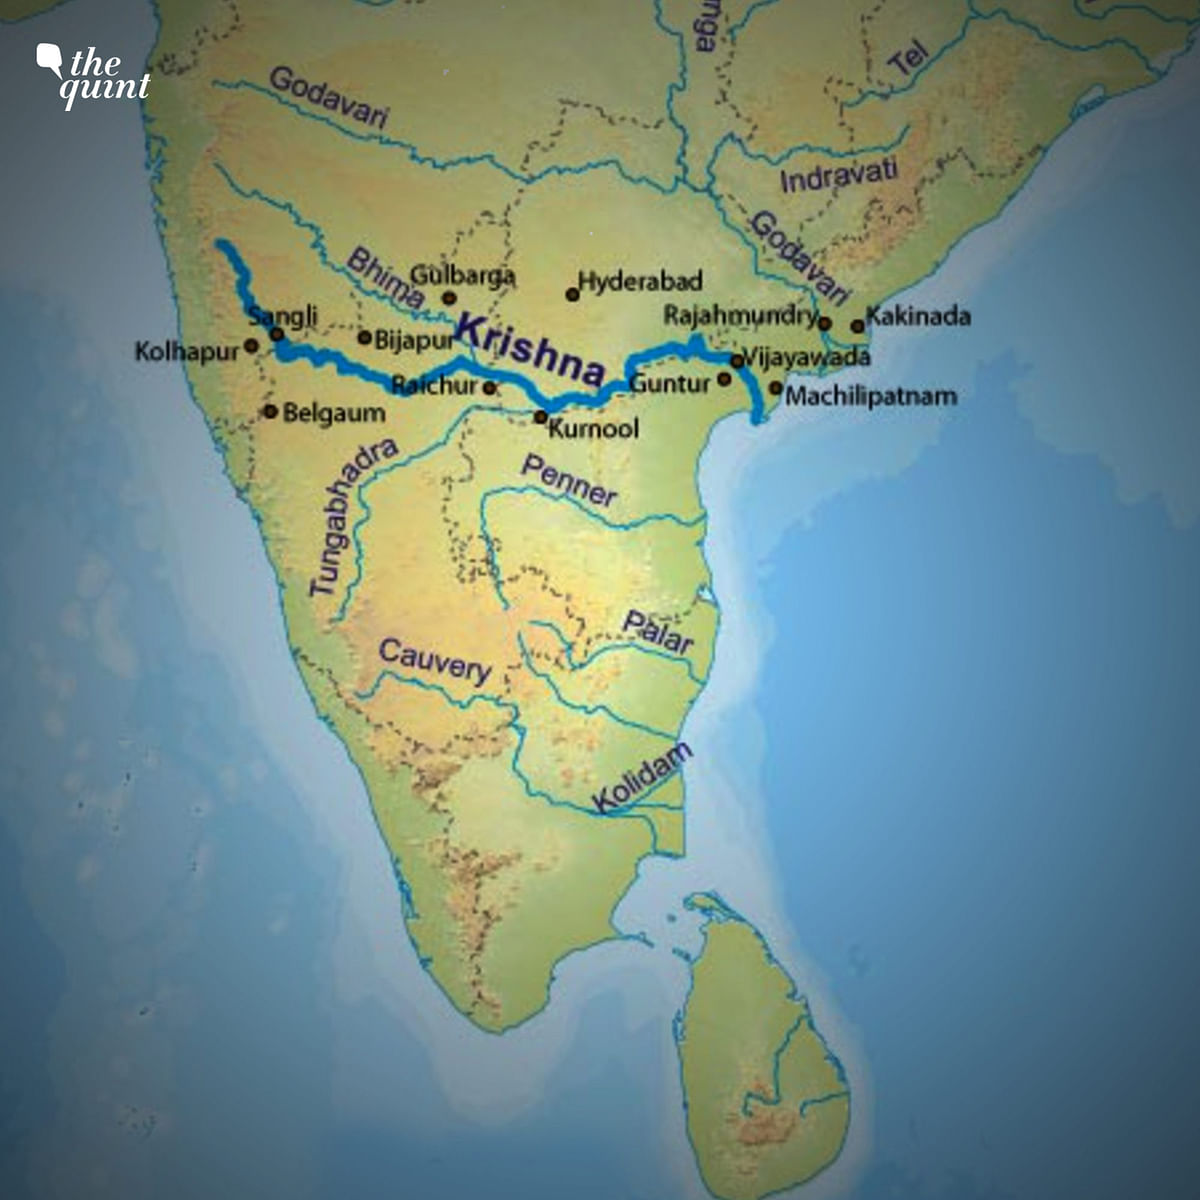 Hydel and irrigation projects of Andhra Pradesh and Telangana have raked up several controversies.